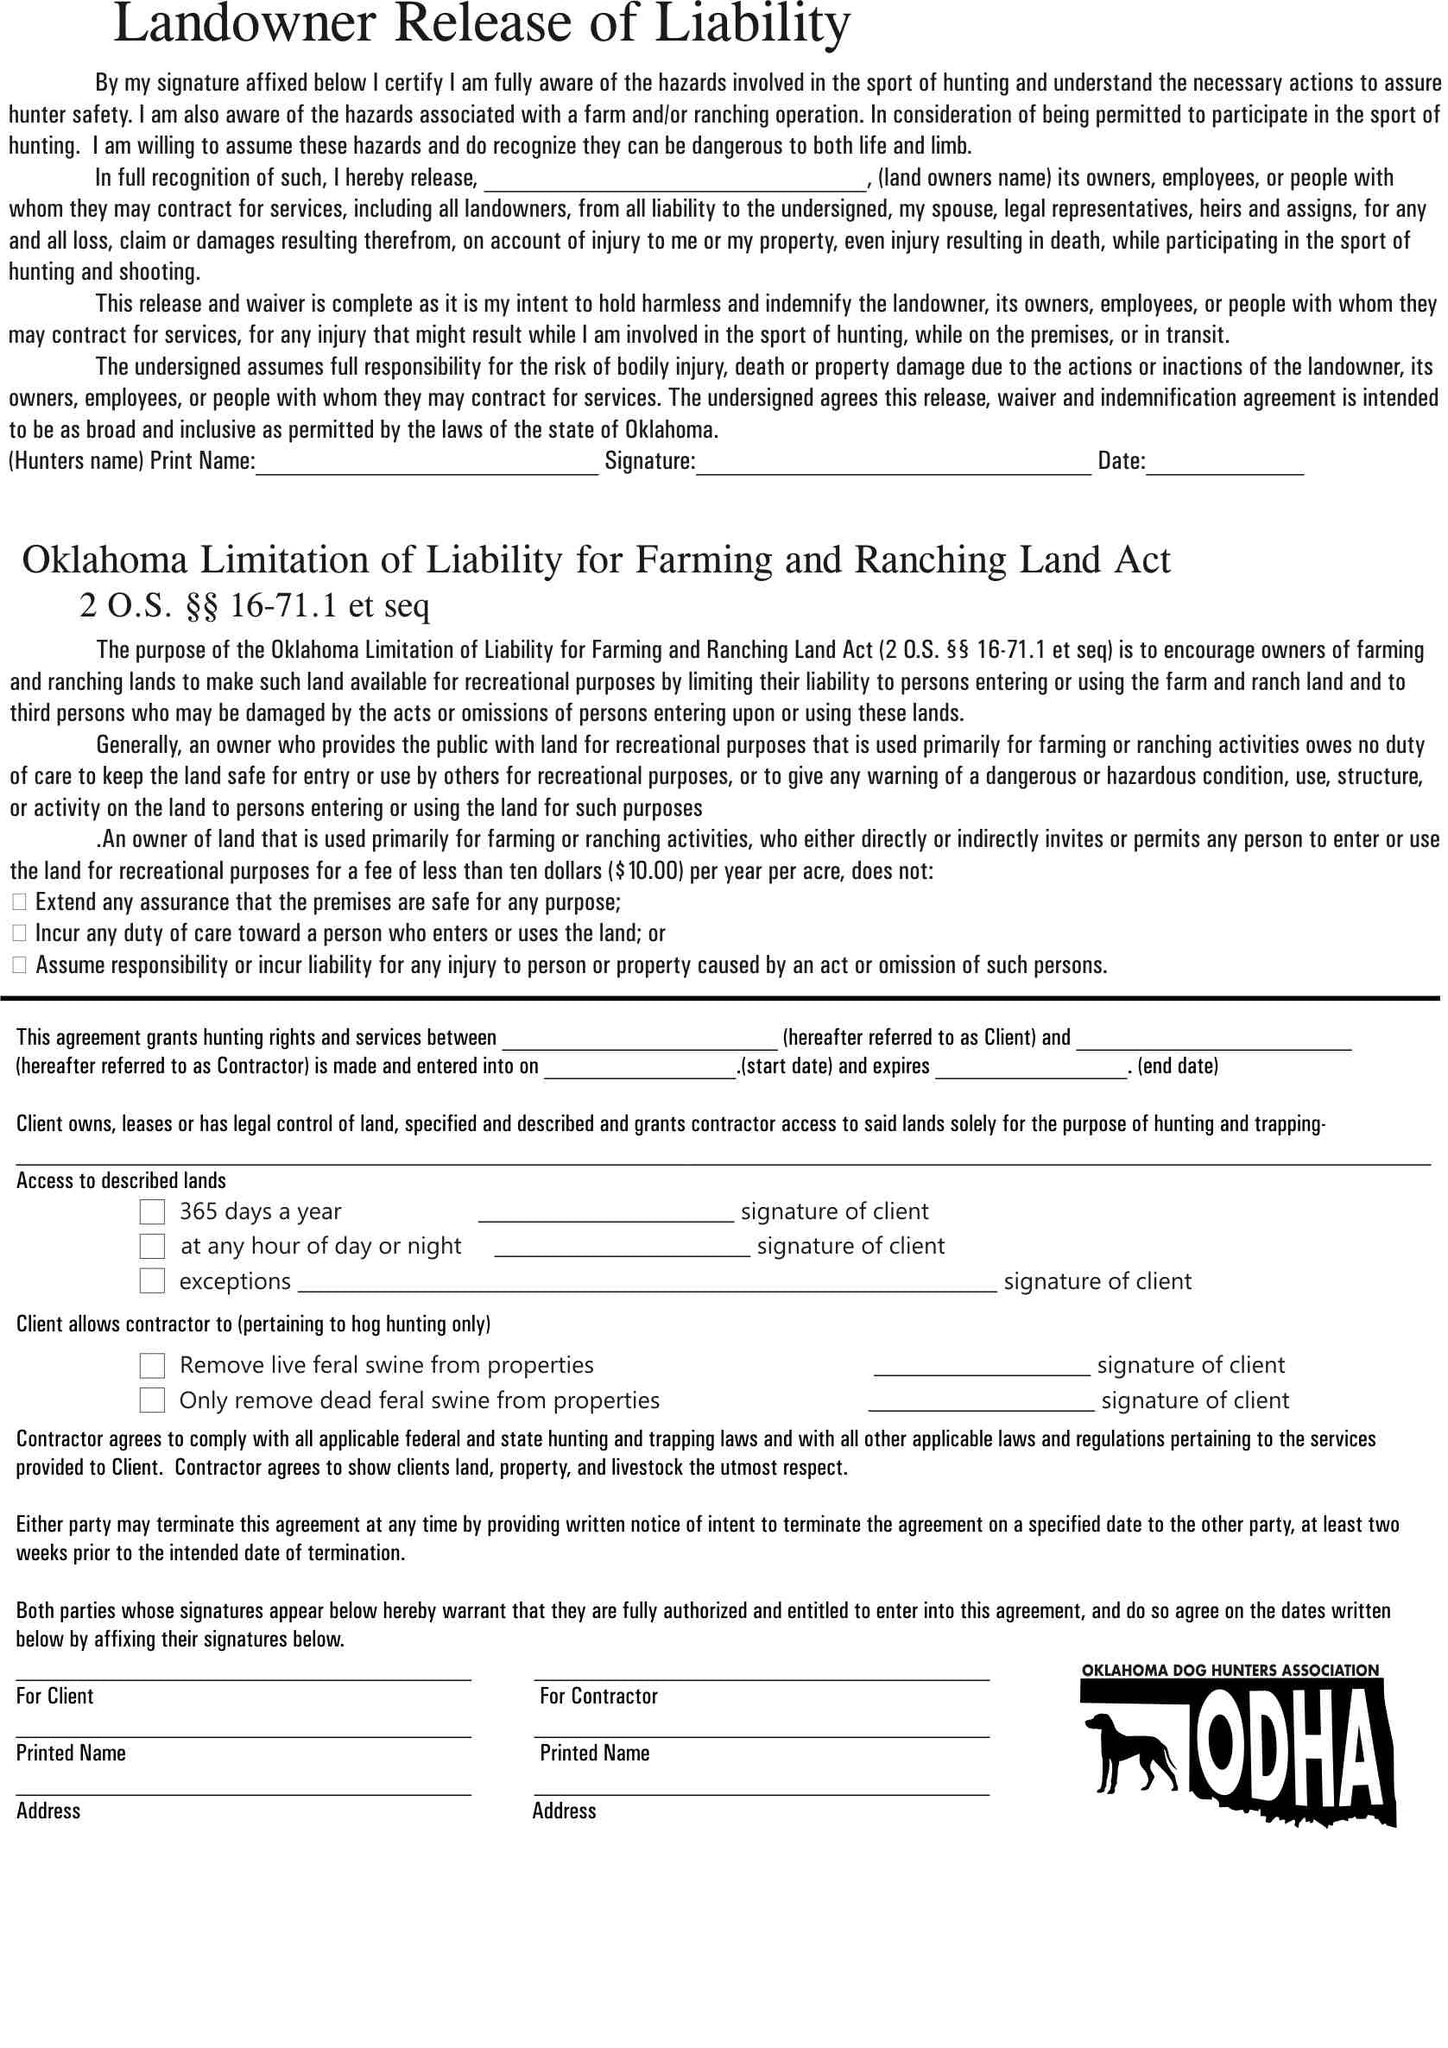 Release of Liability form